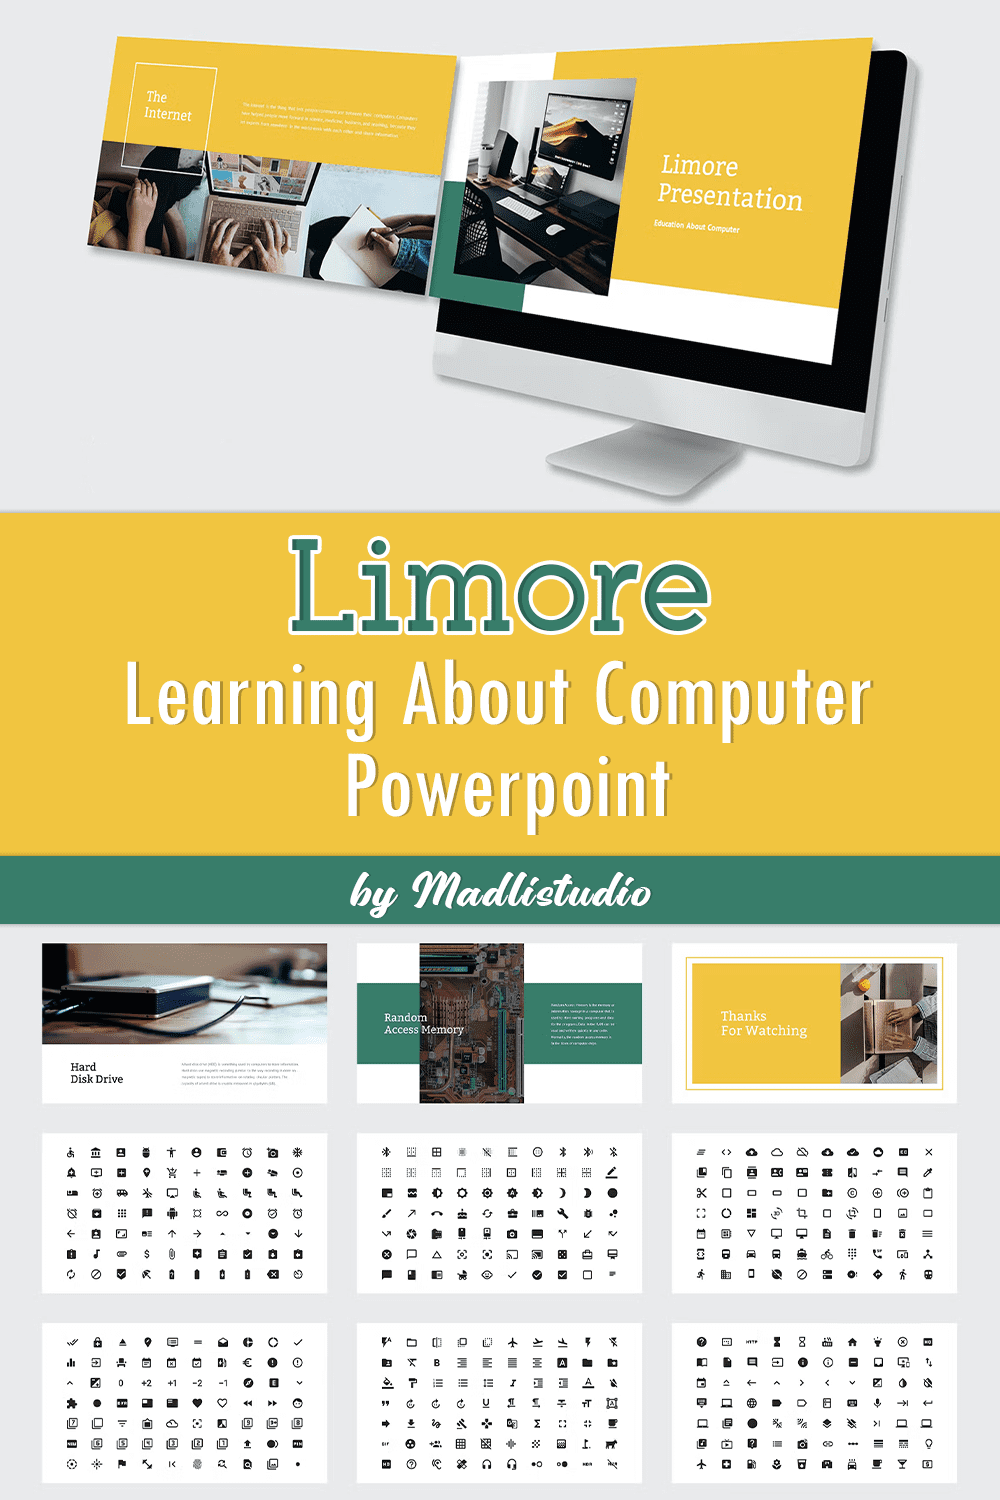 Limore - Learning Via Computer Powerpoint - Pinterest.